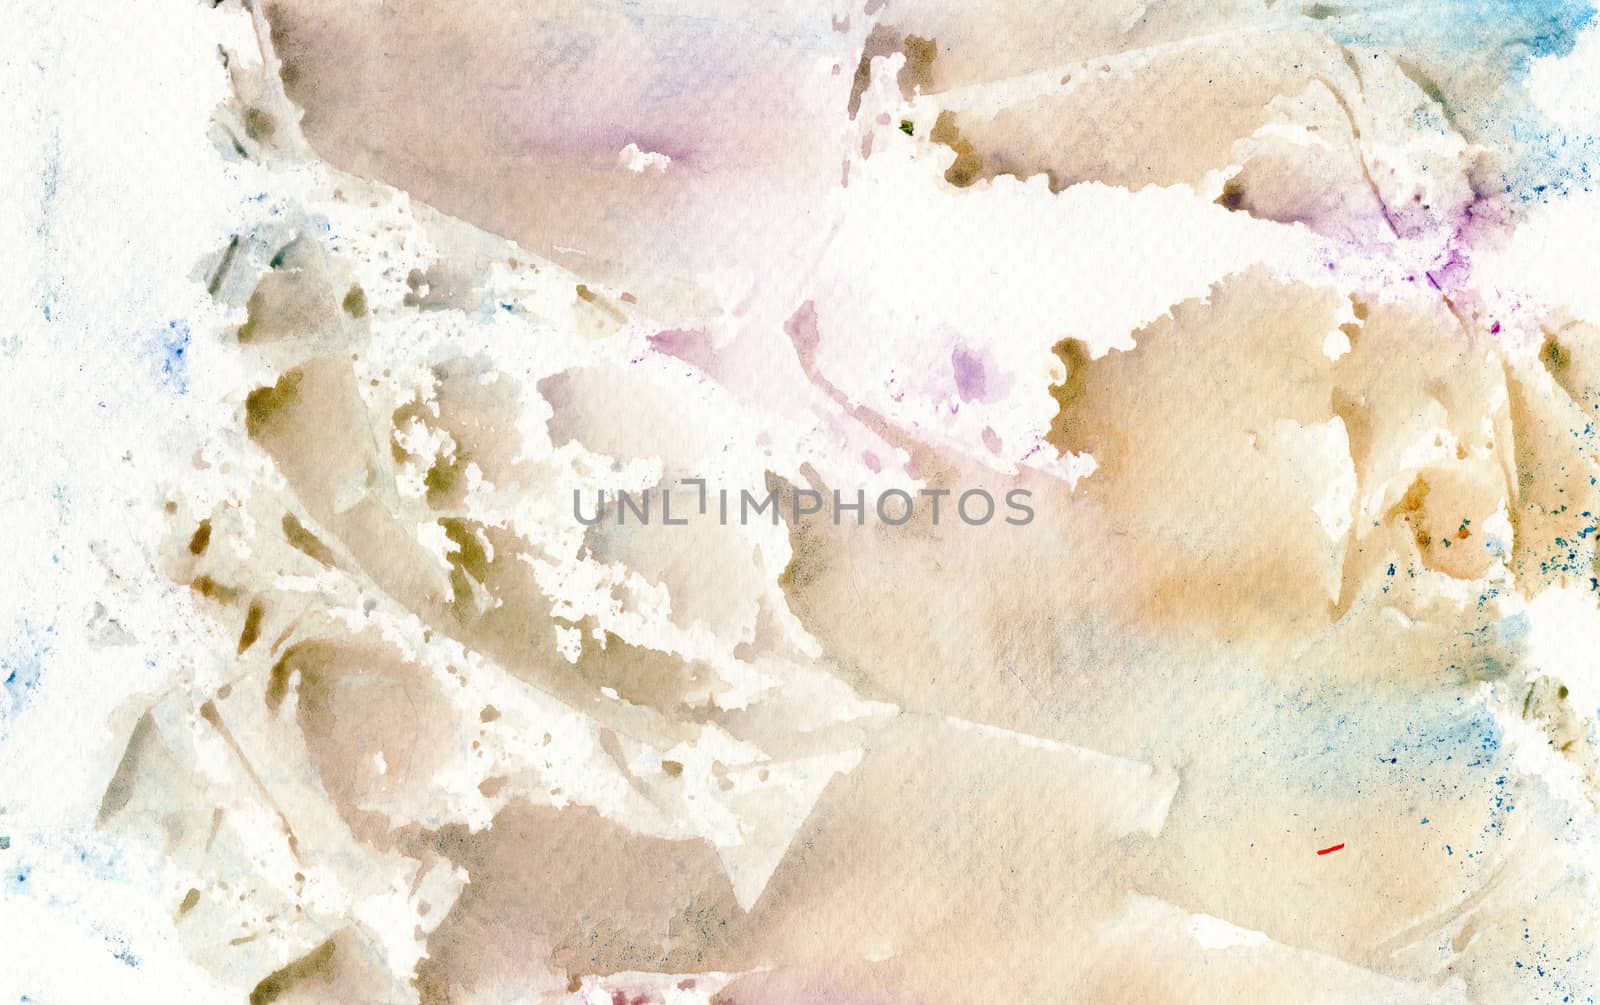 Abstract background of watercolor on paper texture, hand painted in brown